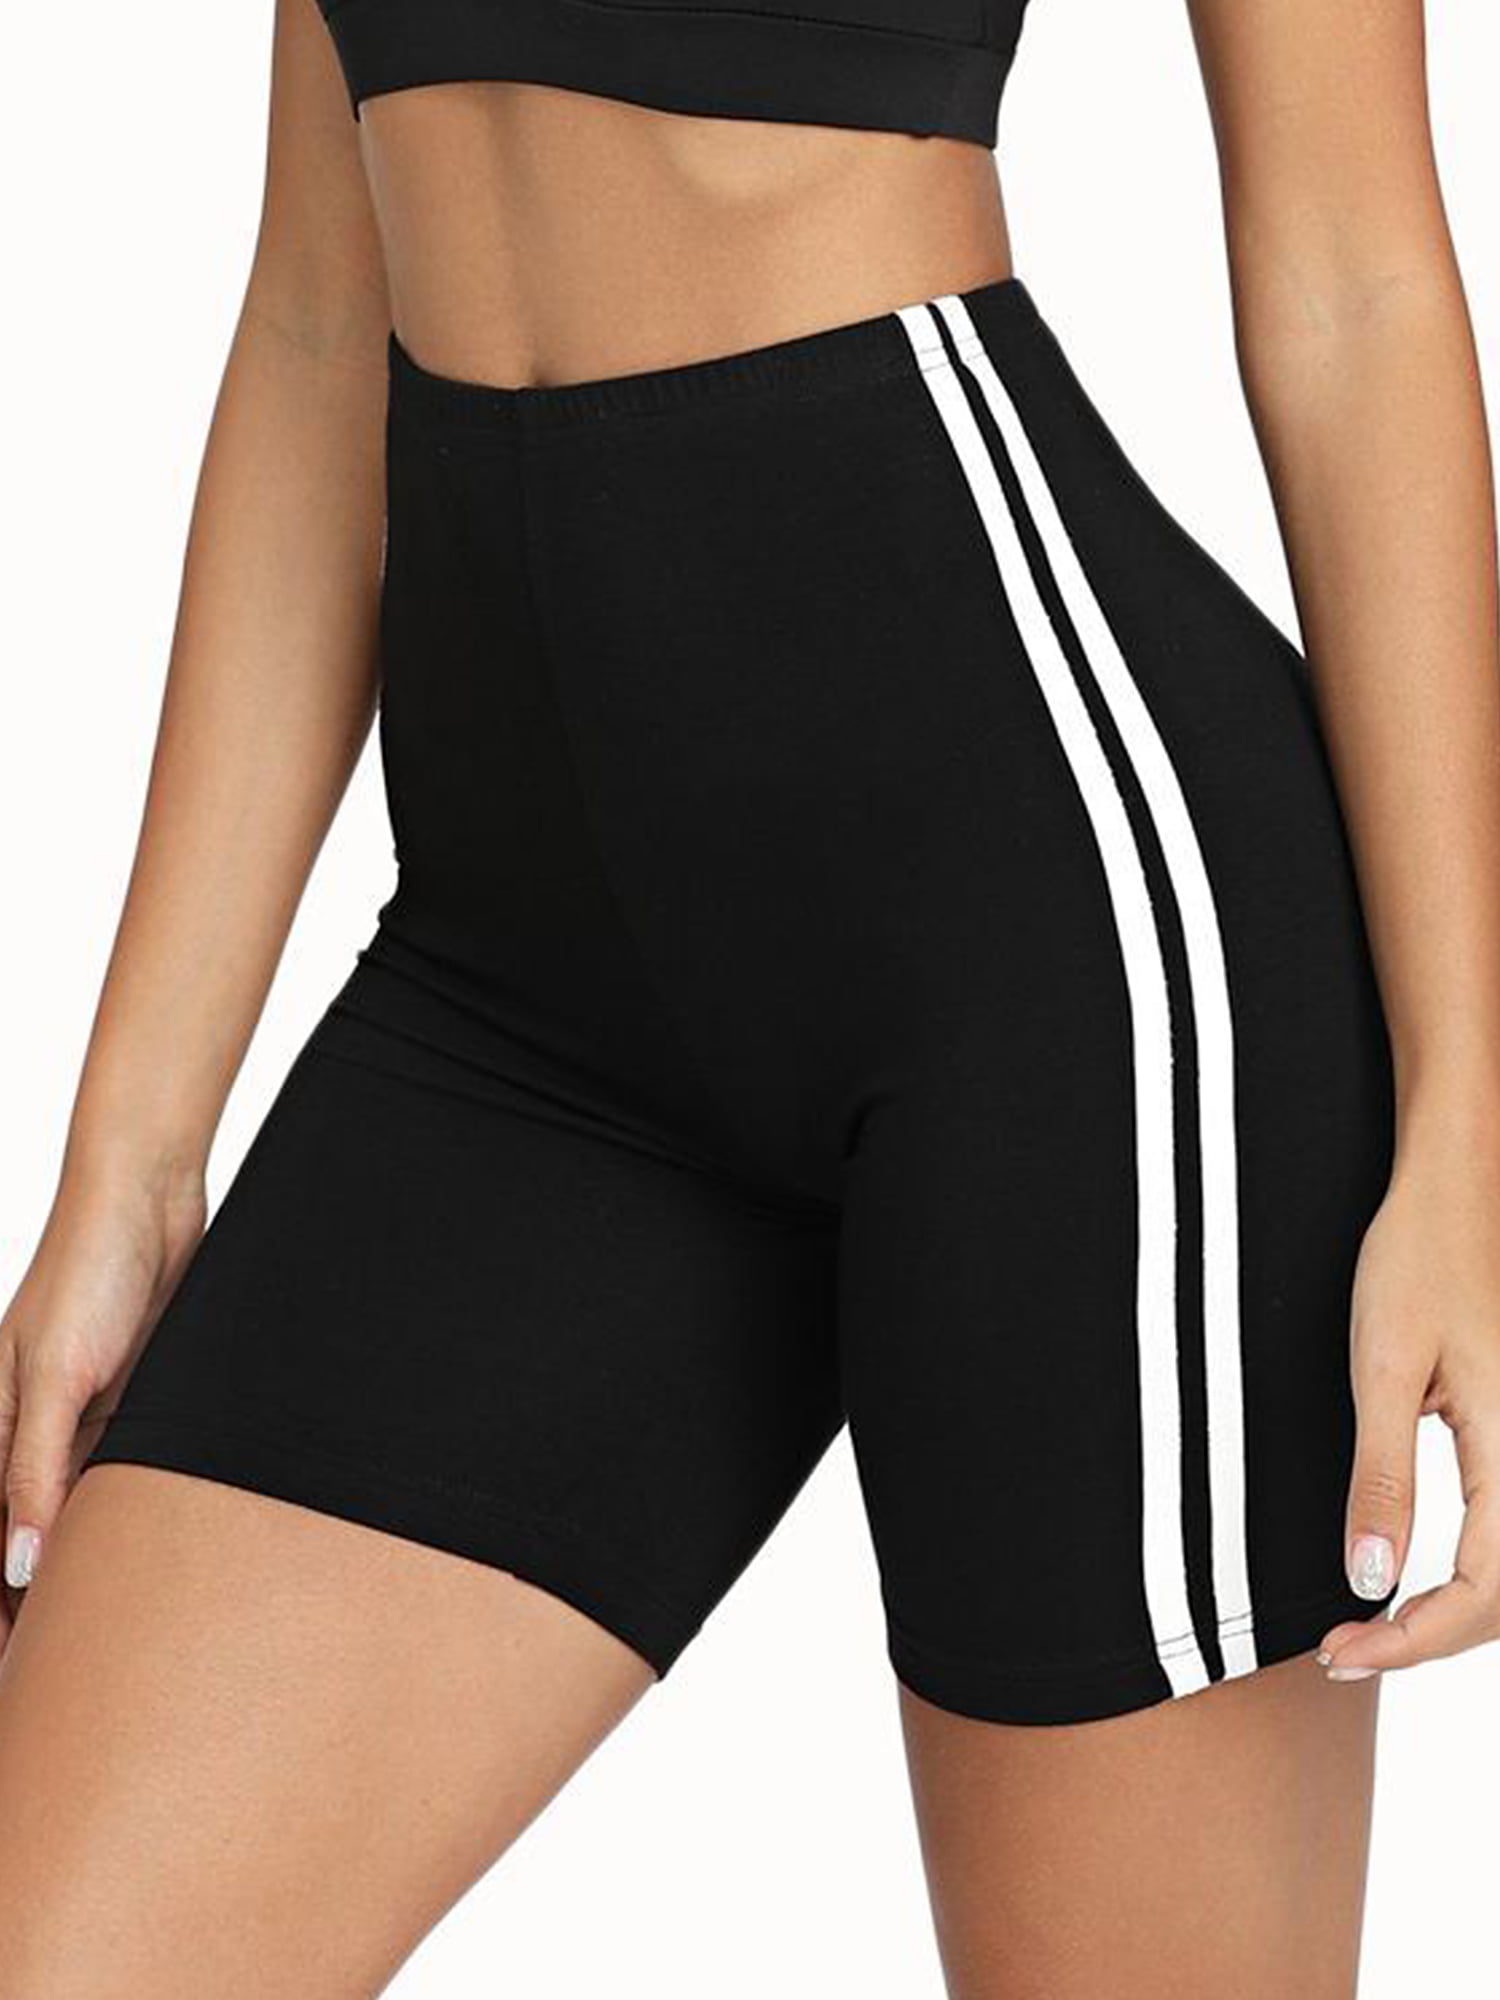 Sykooria Women's Sports Shorts High Waisted Gym Workout Running Yoga Shorts with Pockets